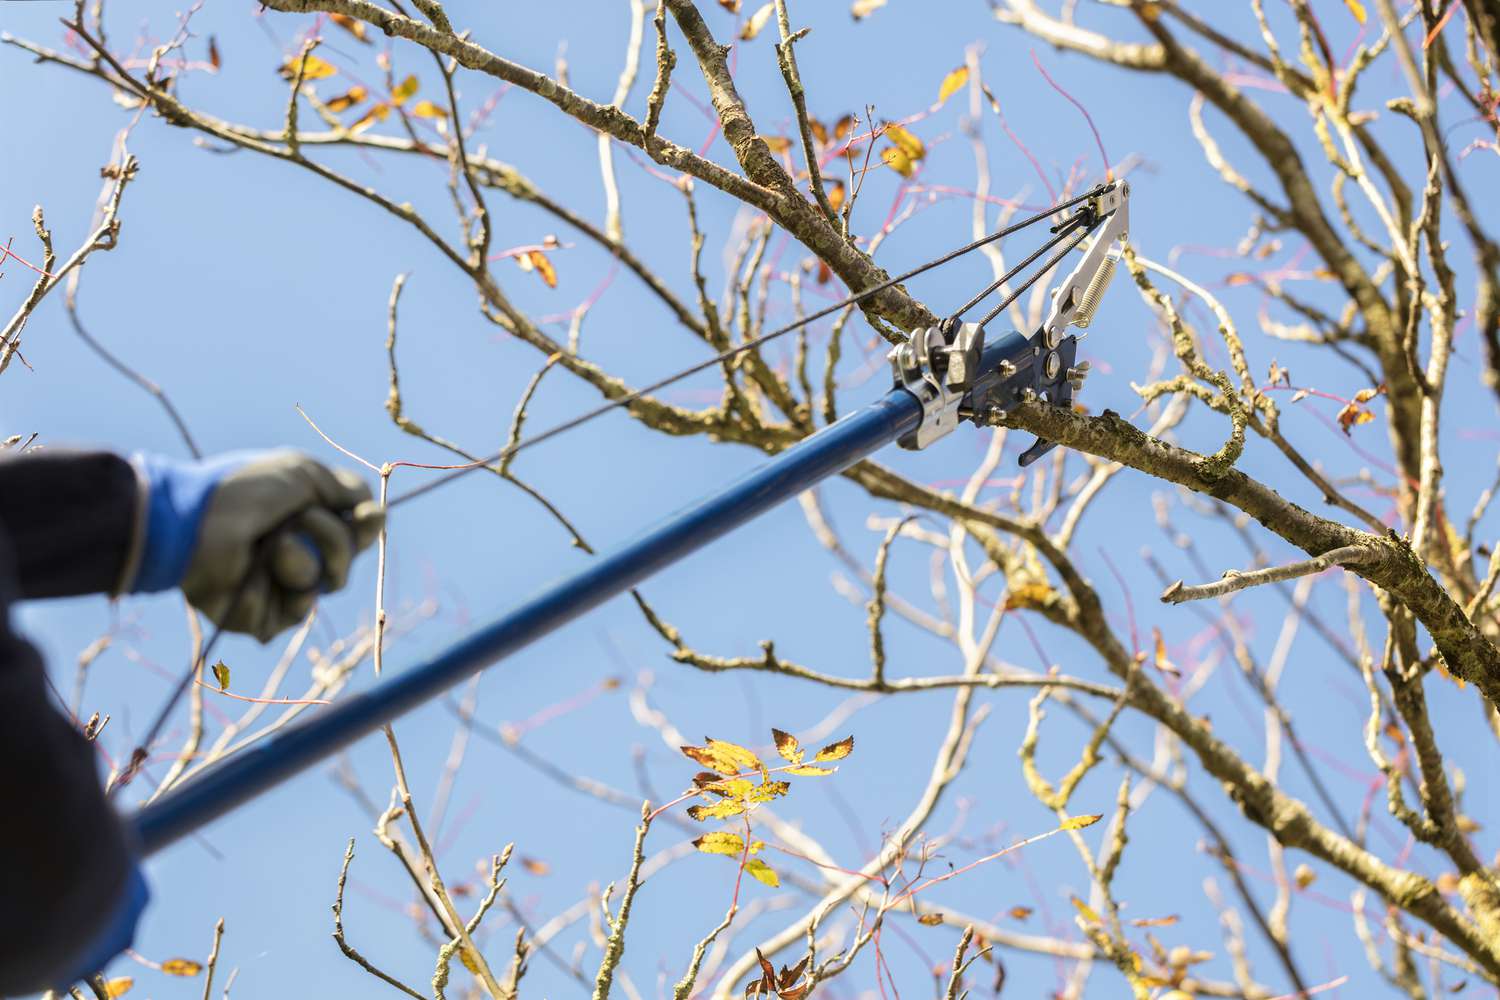 What Is The Best Tool To Cut Large Branches When Pruning Shrubs That Are Hard To Reach